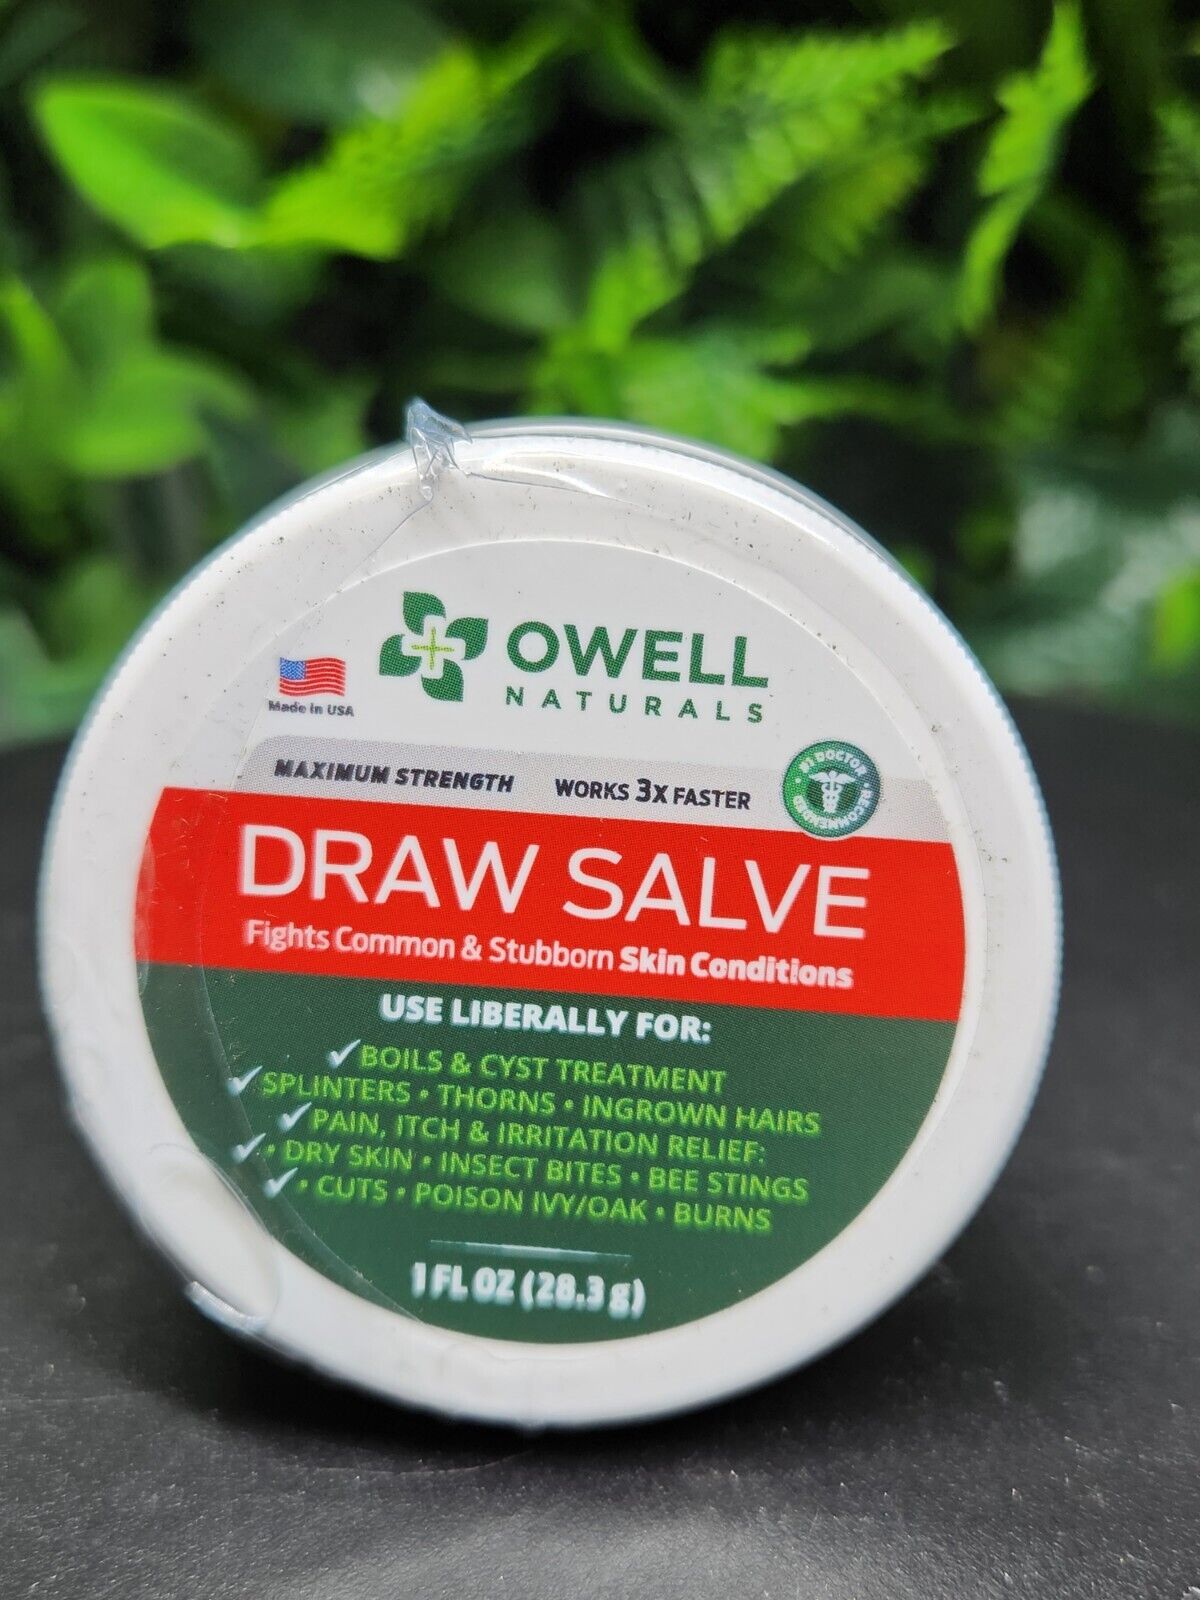 OWELL NATURALS Drawing Salve Ointment 1Oz, Ingrown Hair Treatment, Boil & Cyst